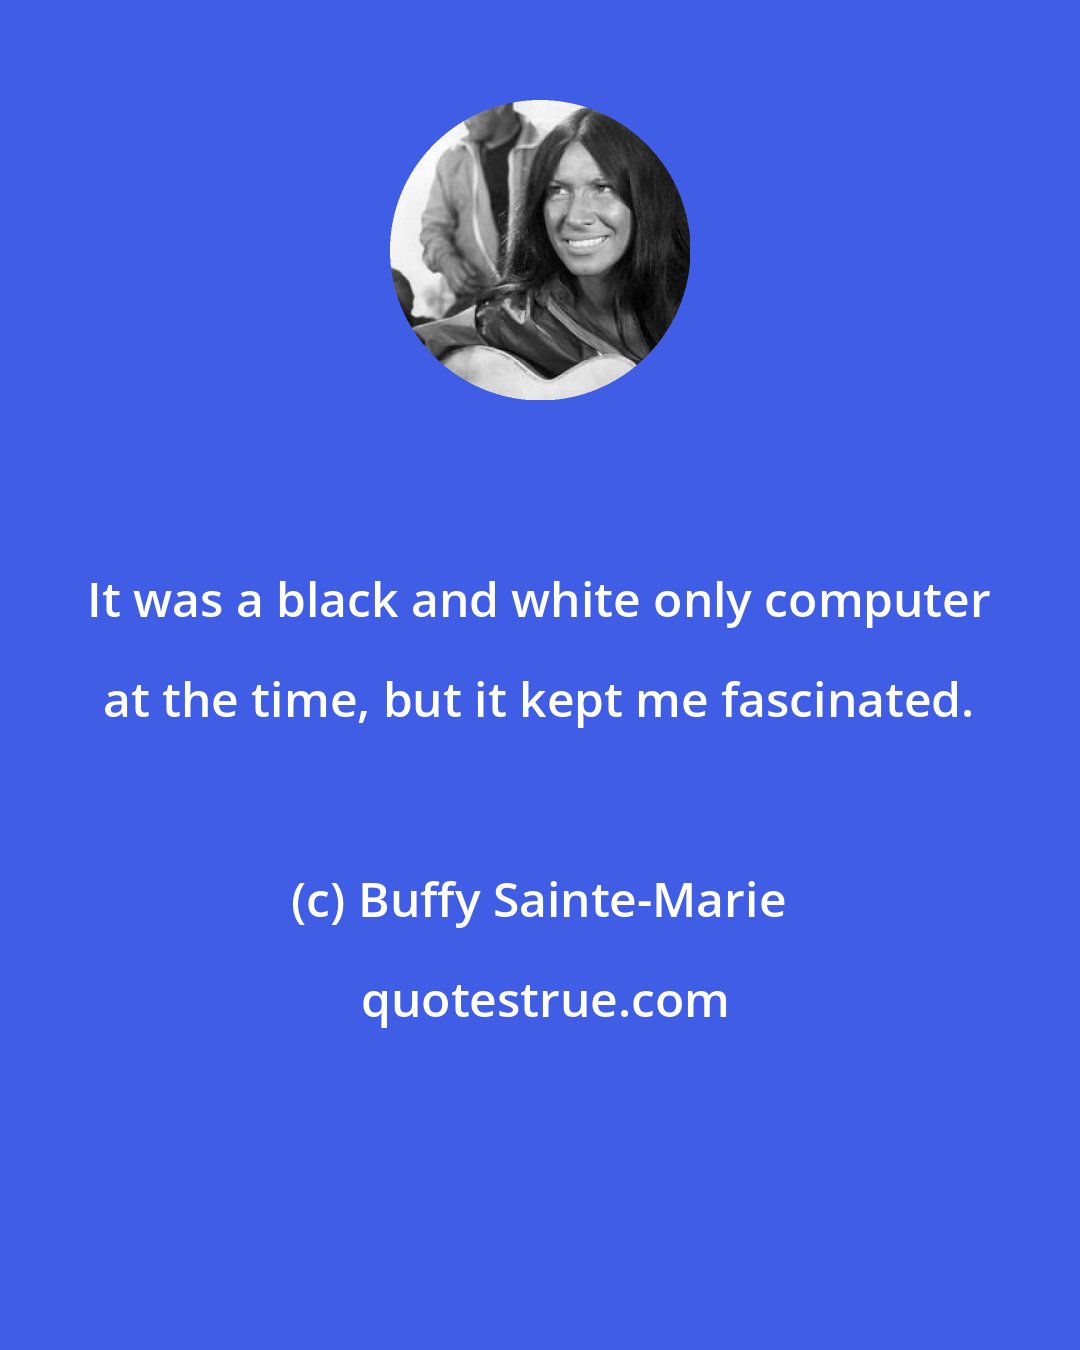 Buffy Sainte-Marie: It was a black and white only computer at the time, but it kept me fascinated.